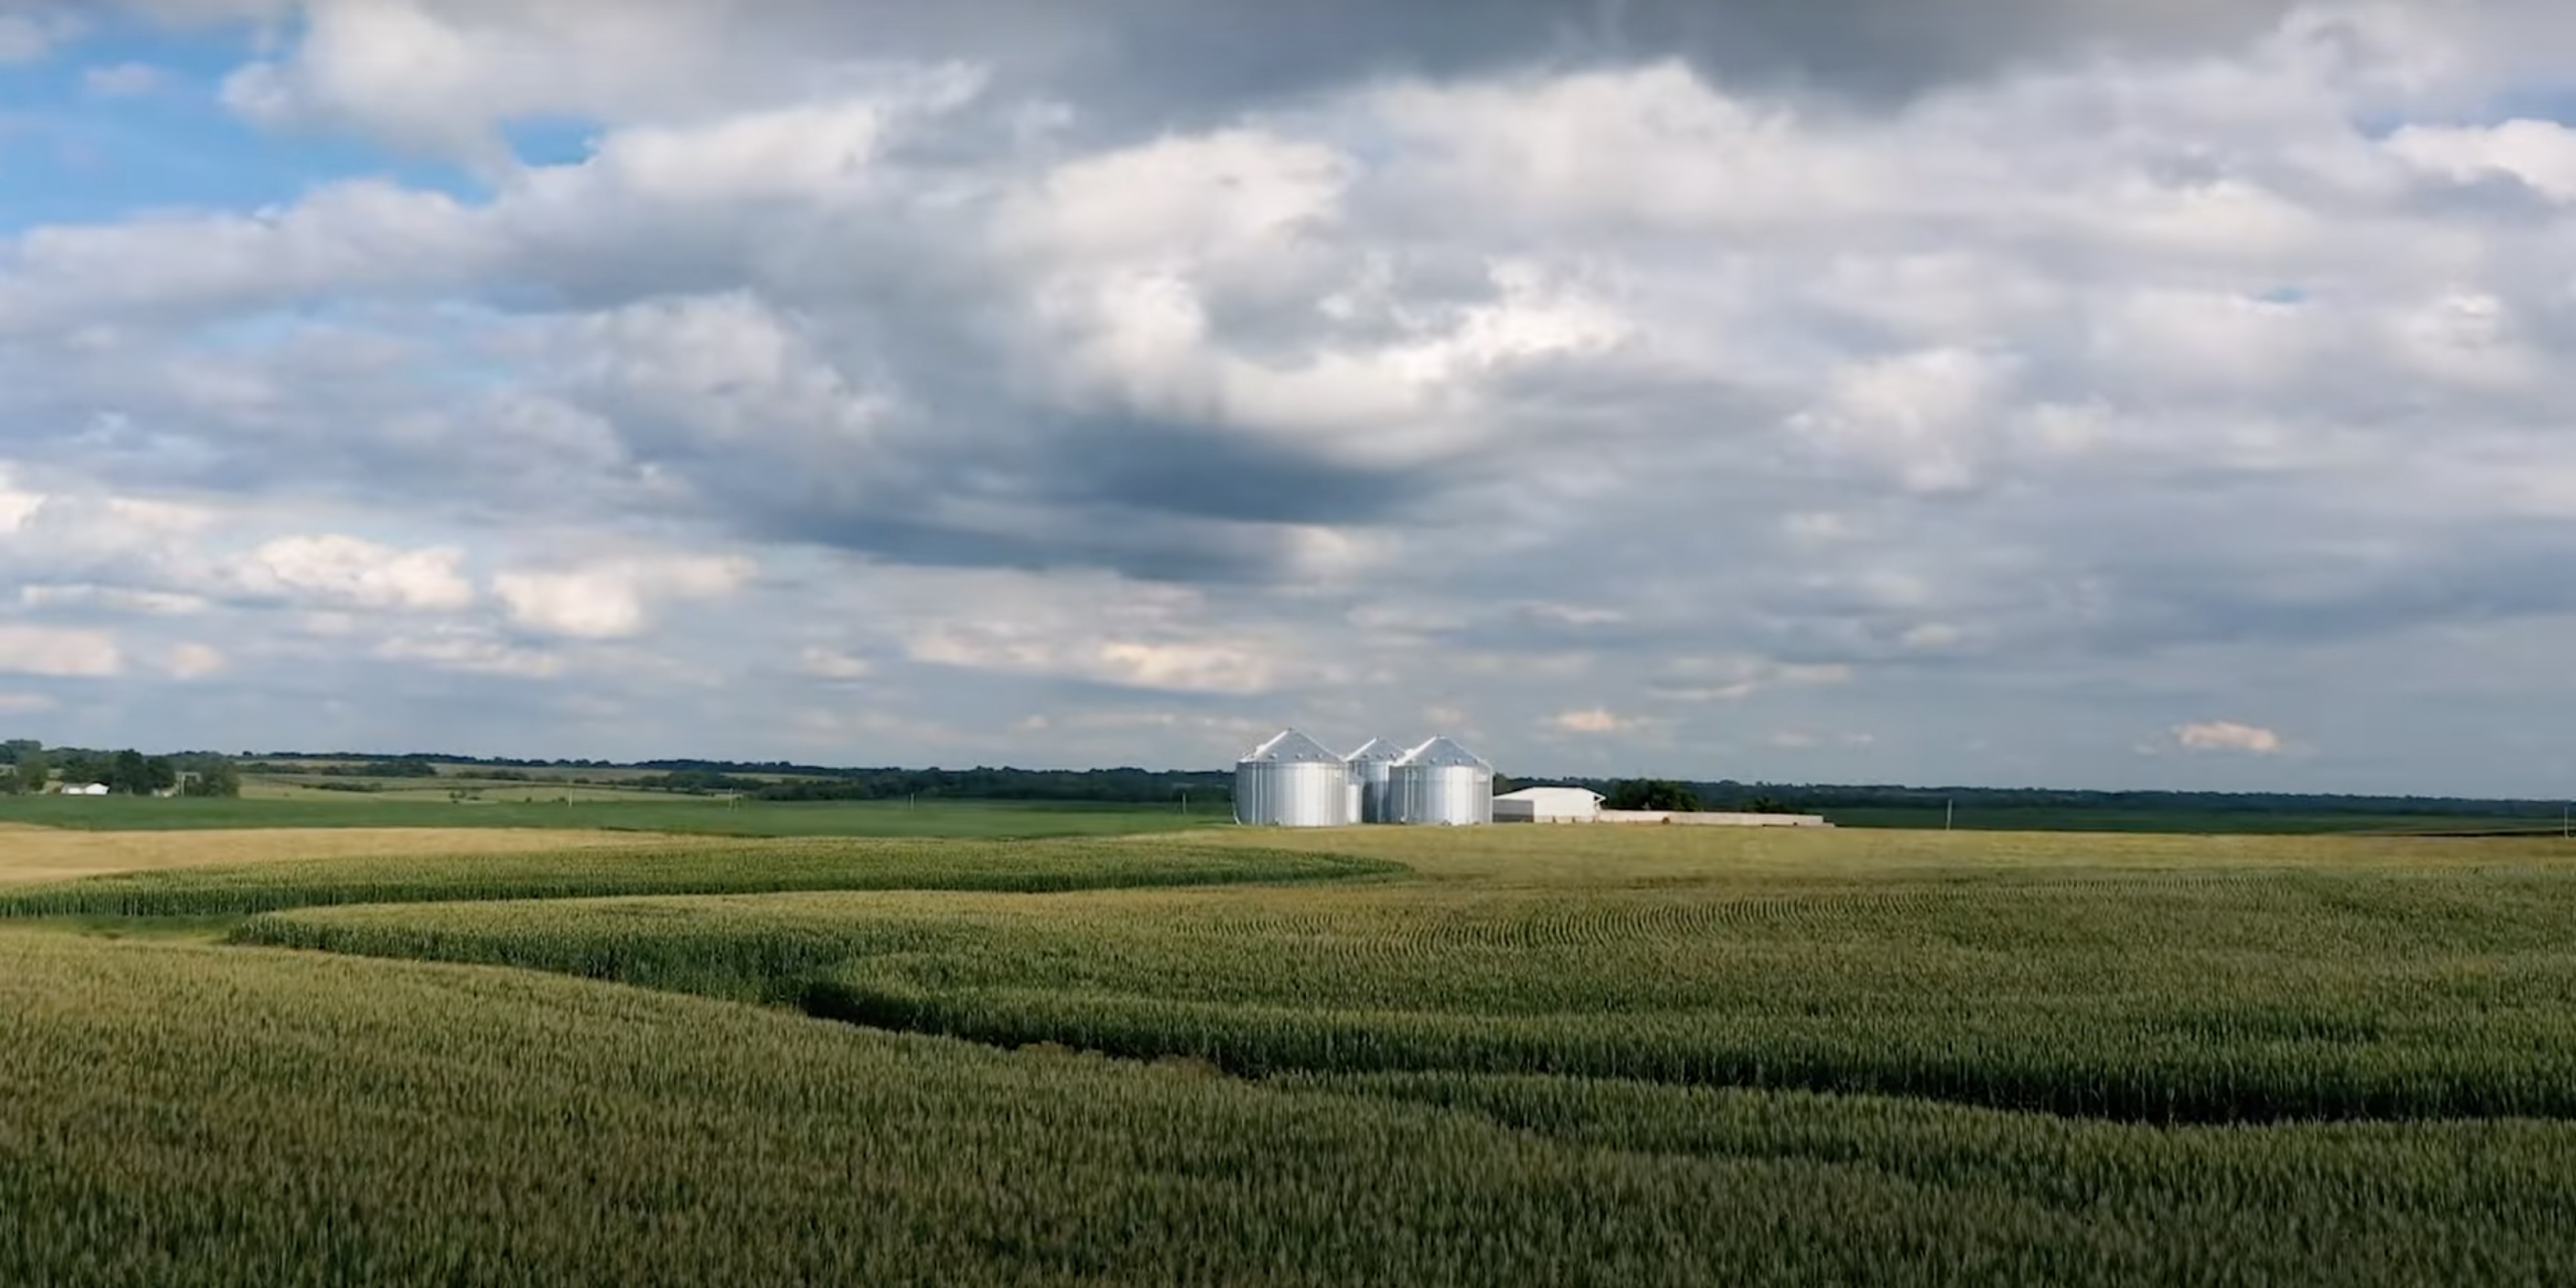 Video preview image of a farm with grain silos in the background